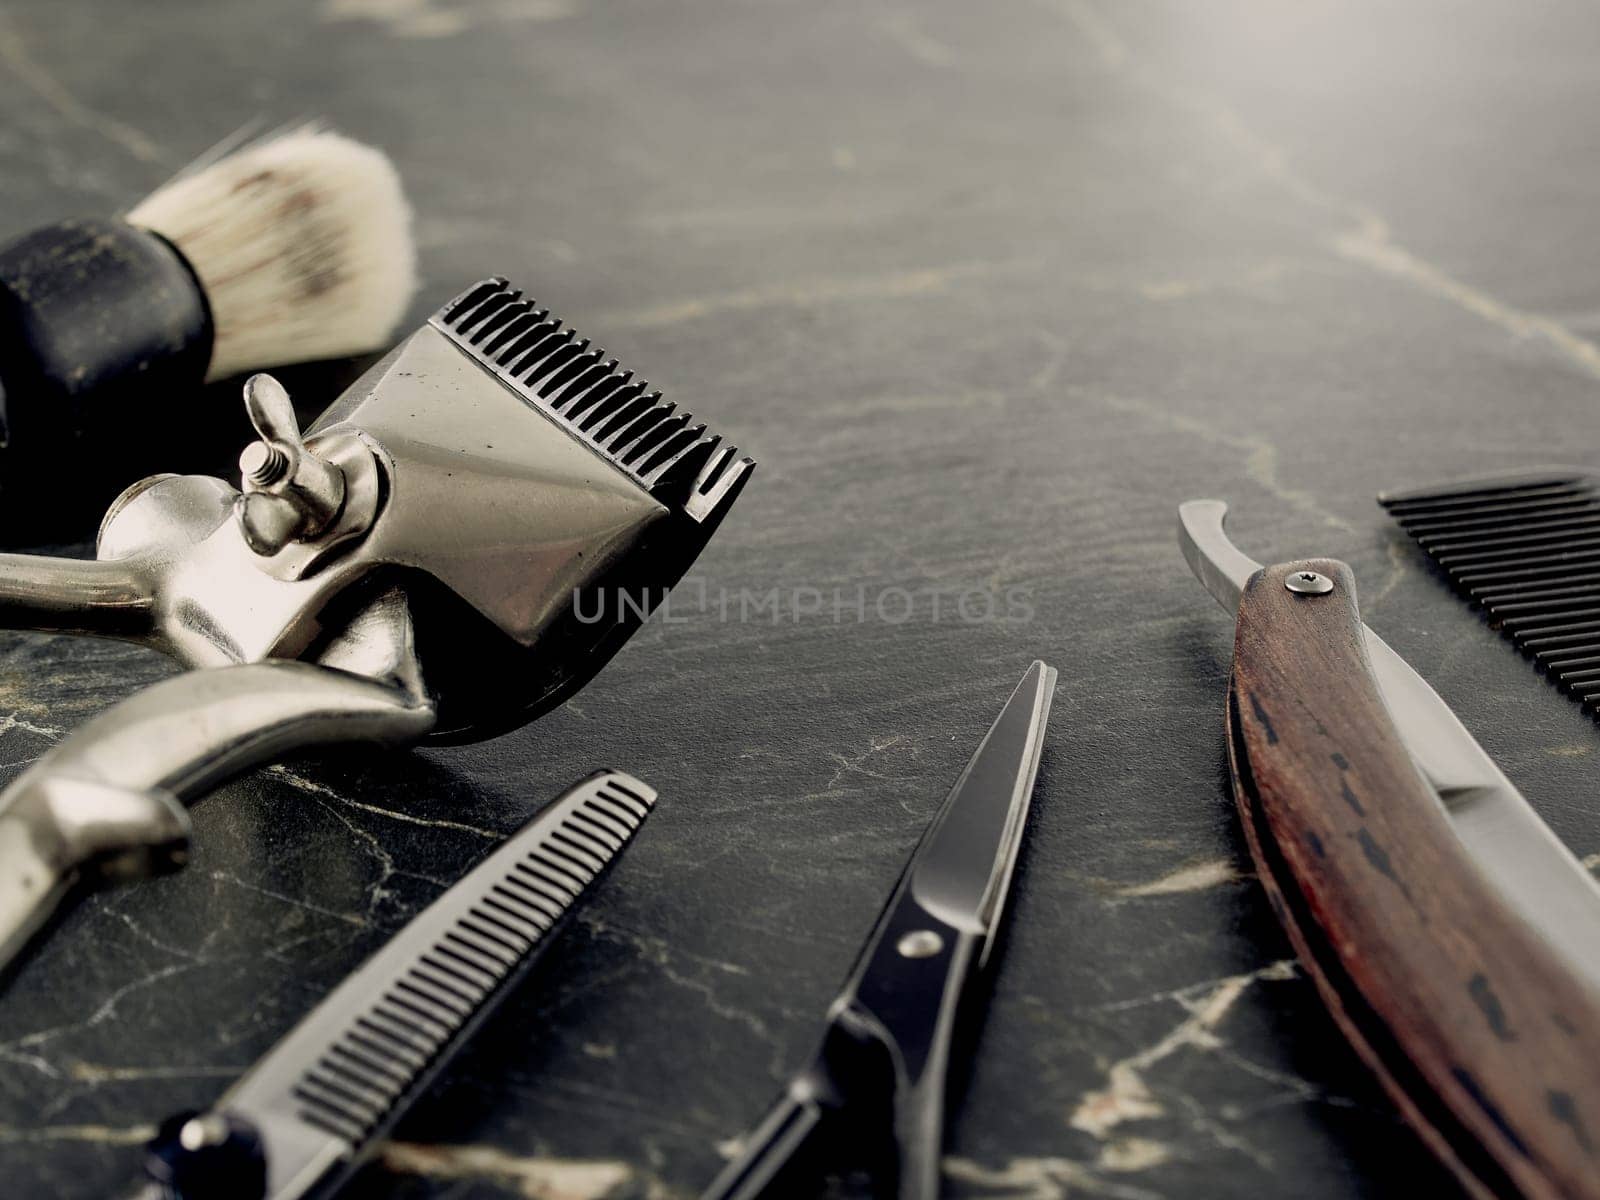 On a grey marble surface are old barber tools. Vintage manual hair clipper comb razor shaving brush shaving brush hairdressing scissors.